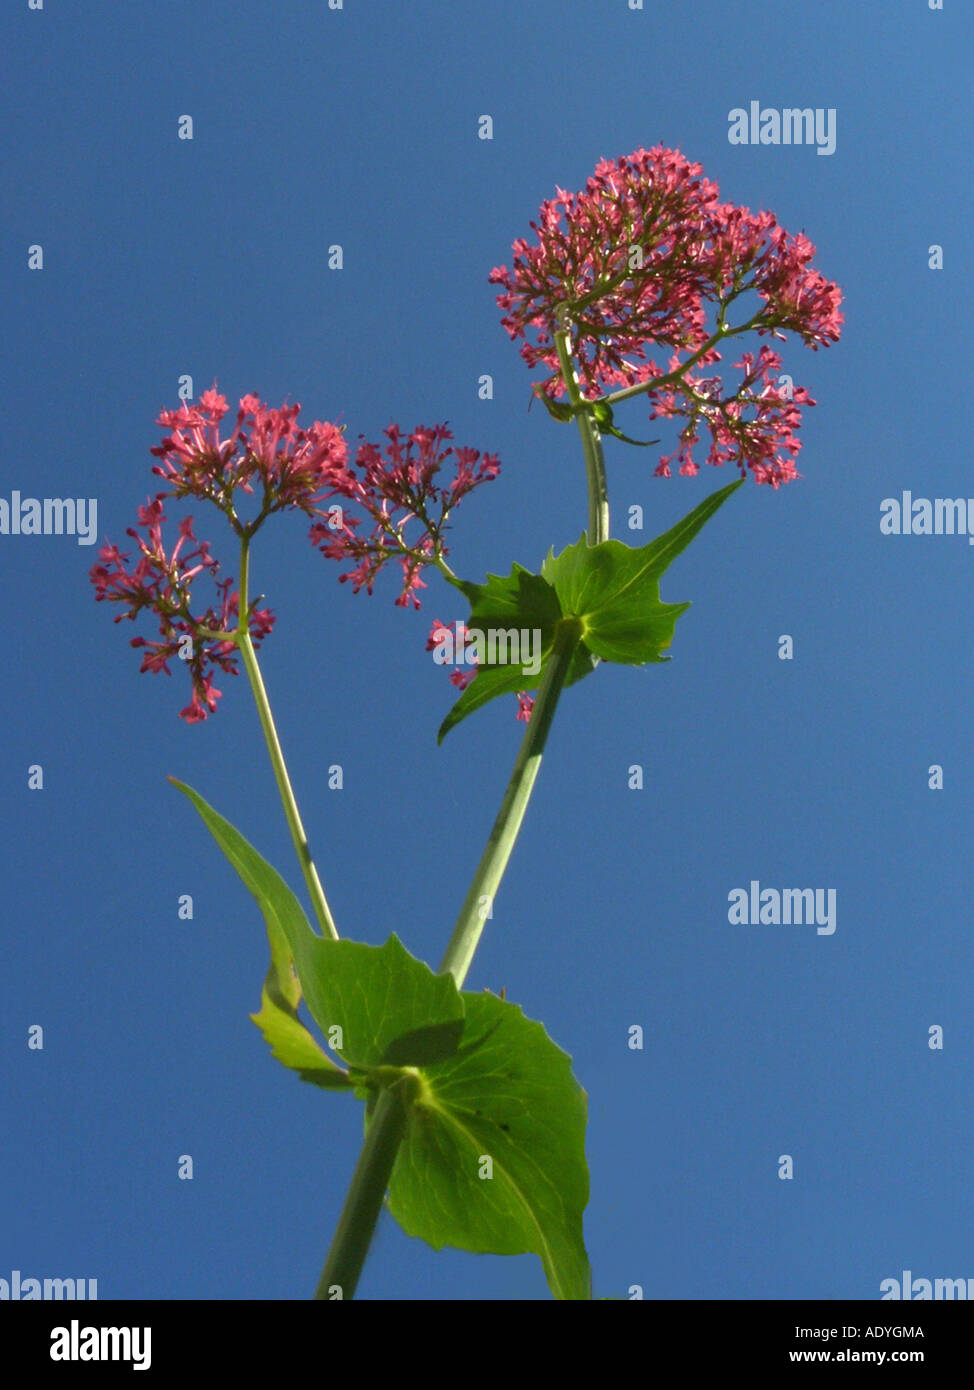 red valerian (Centranthus ruber), inflorescences against blue sky Stock Photo